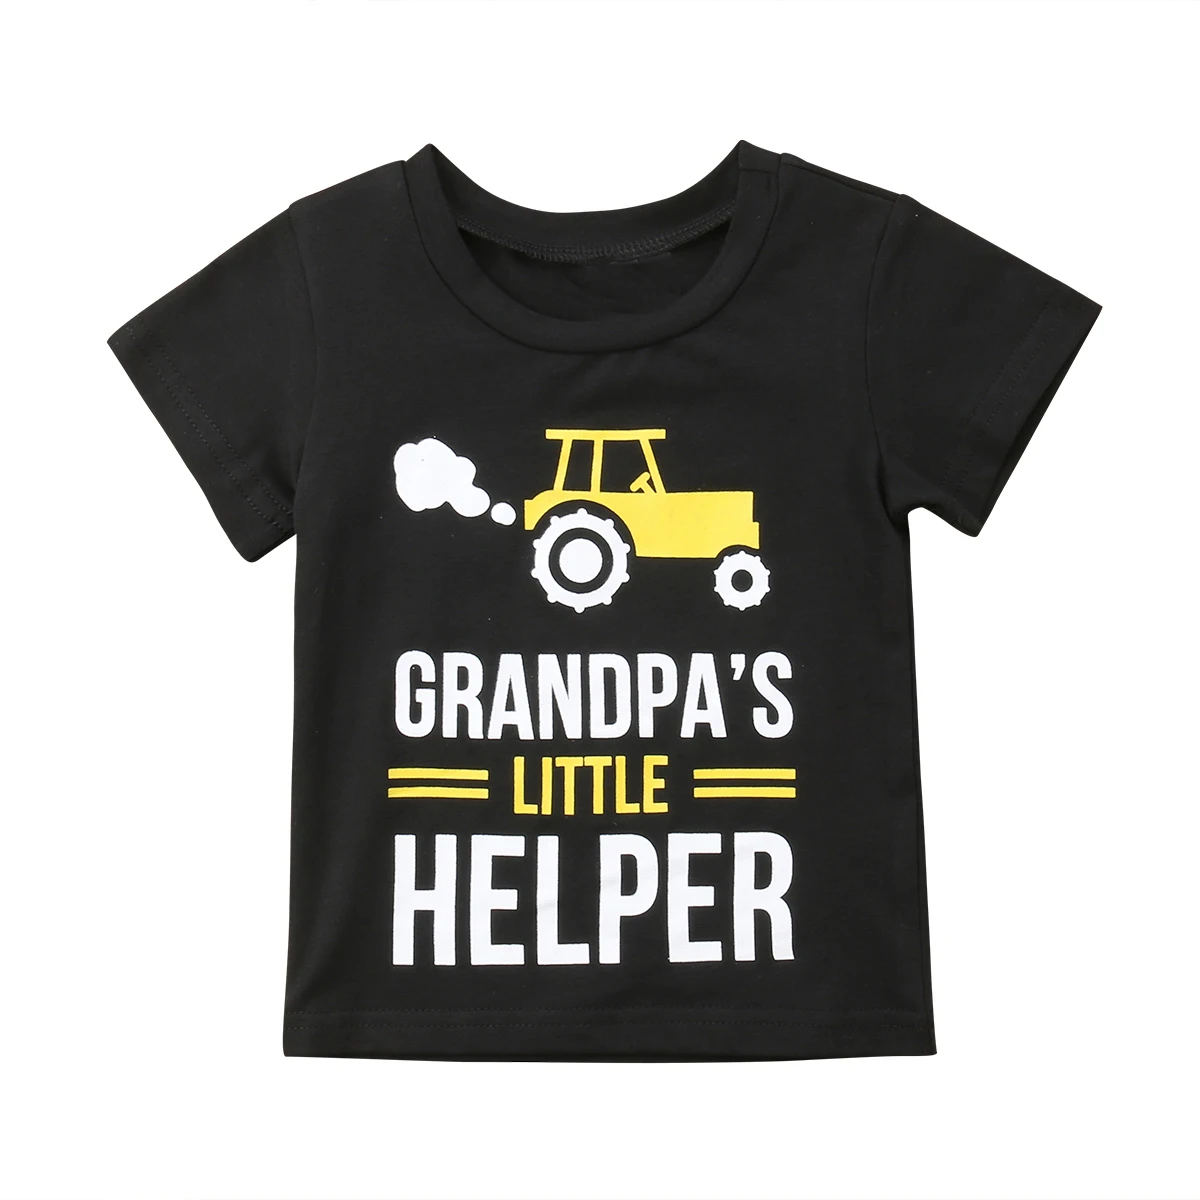 matching family fall outfits 1pc Grandpa and Grandpa's Little Helper Matching Grandpa and Grandson T-shirts Summer Short Sleeve Matching Family Look Outfits father and son matching outfits